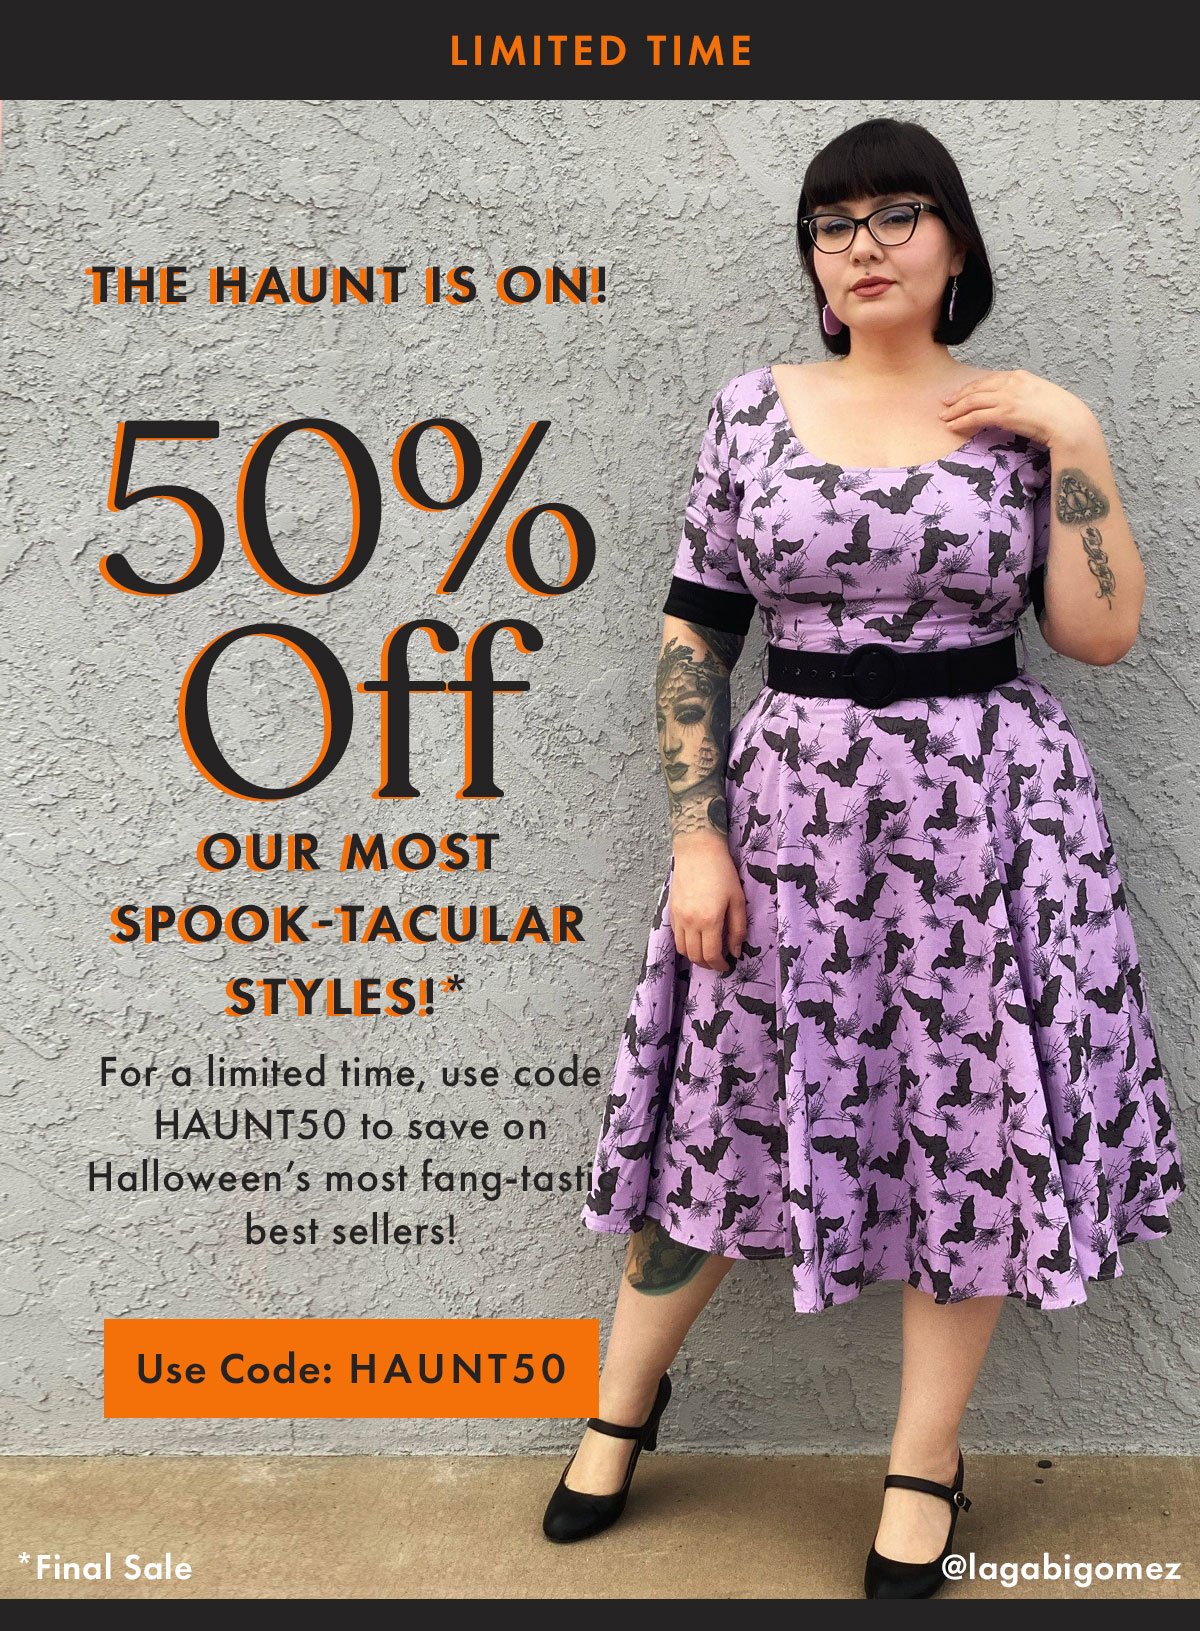 The Haunt Is On! | 50% Off Our Most Spook-tacular Styles